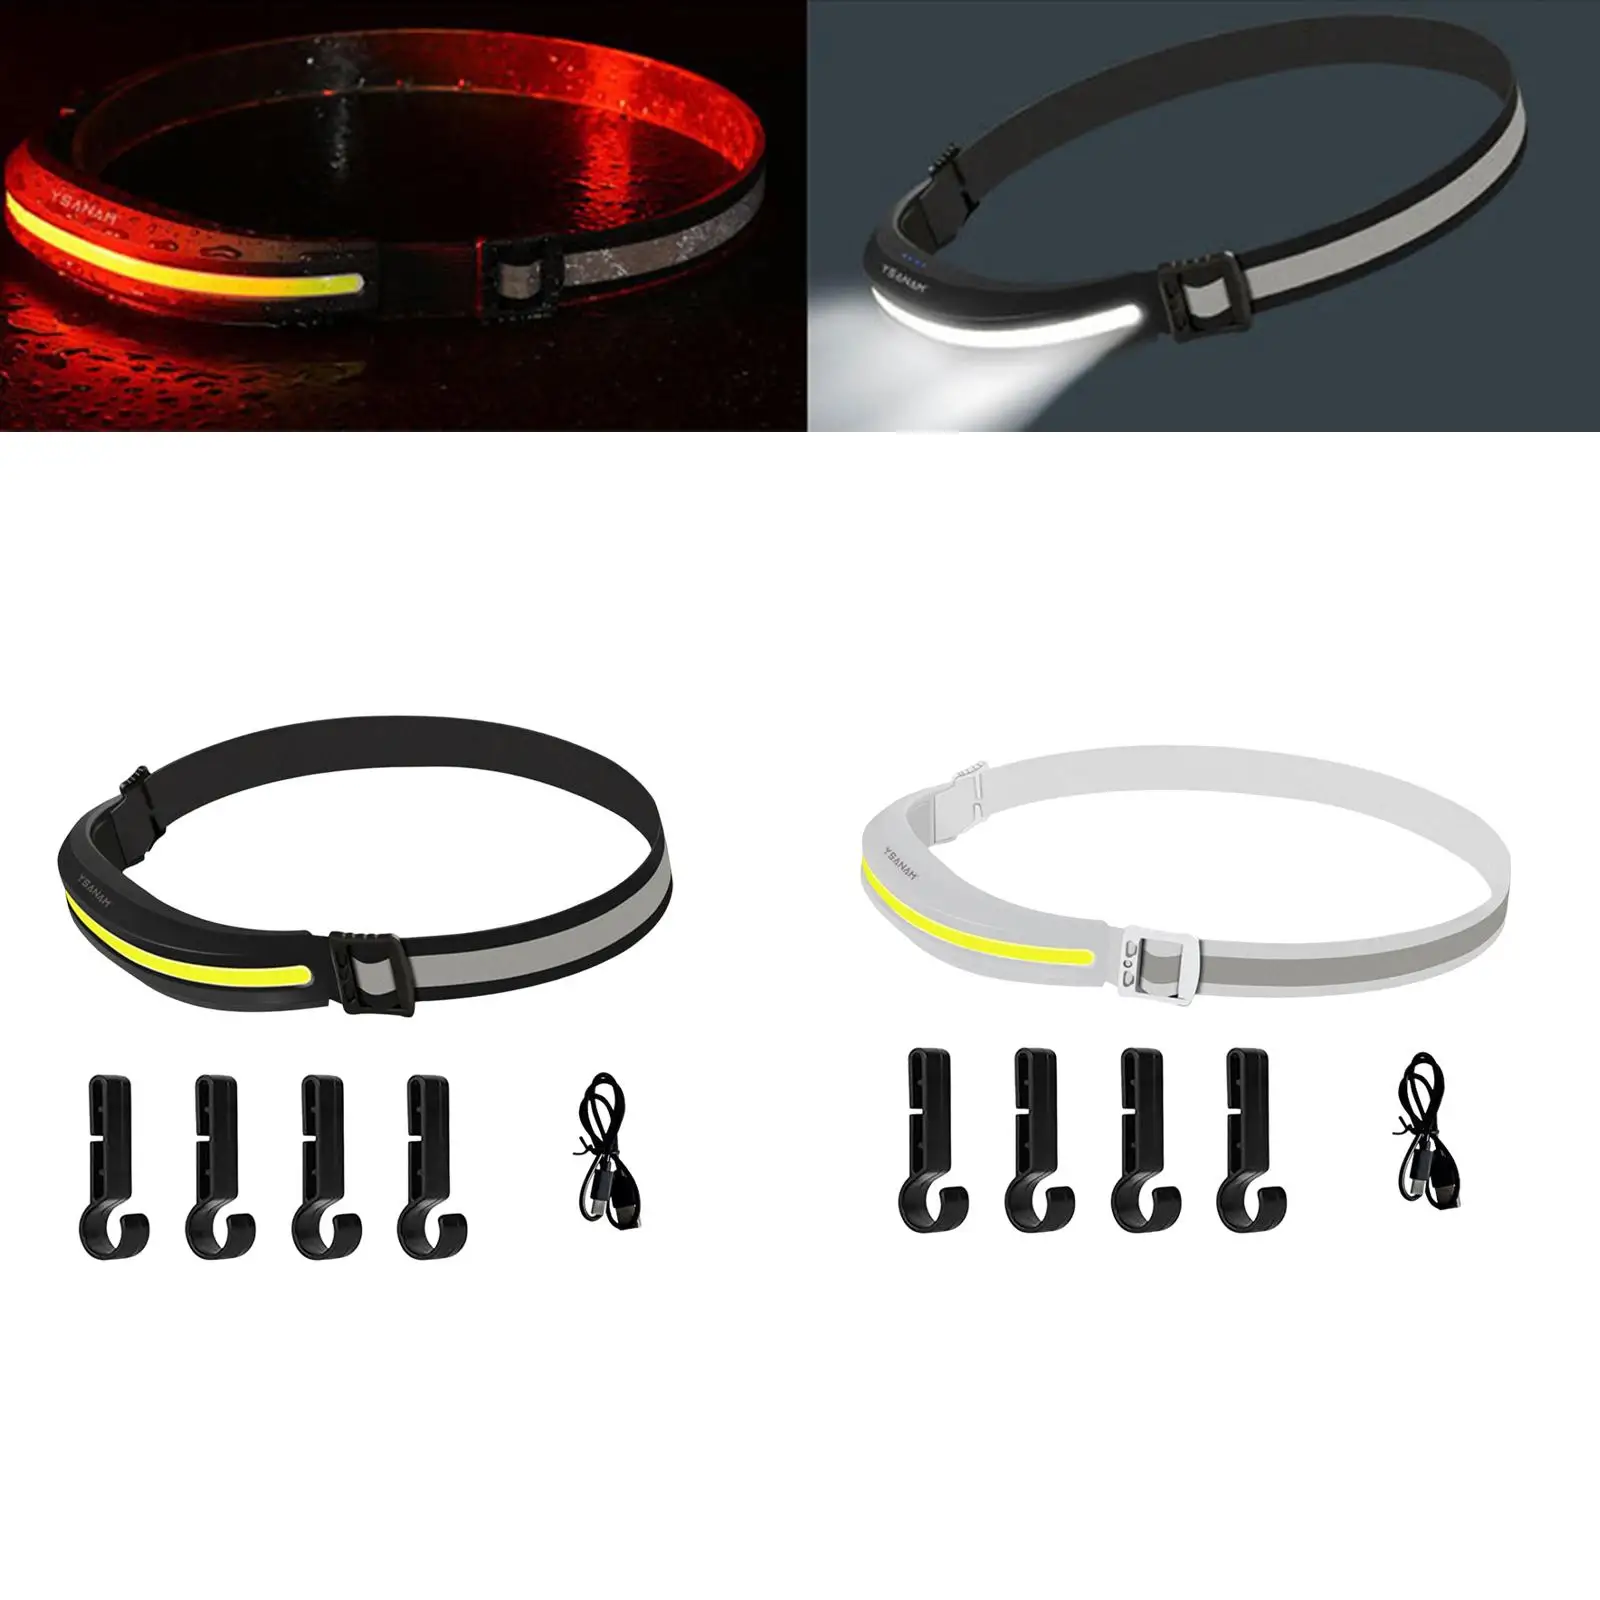 LED Headlight Comfortable Elastic Head Band Light COB Headlamp for Running Cycling Camping Outdoor